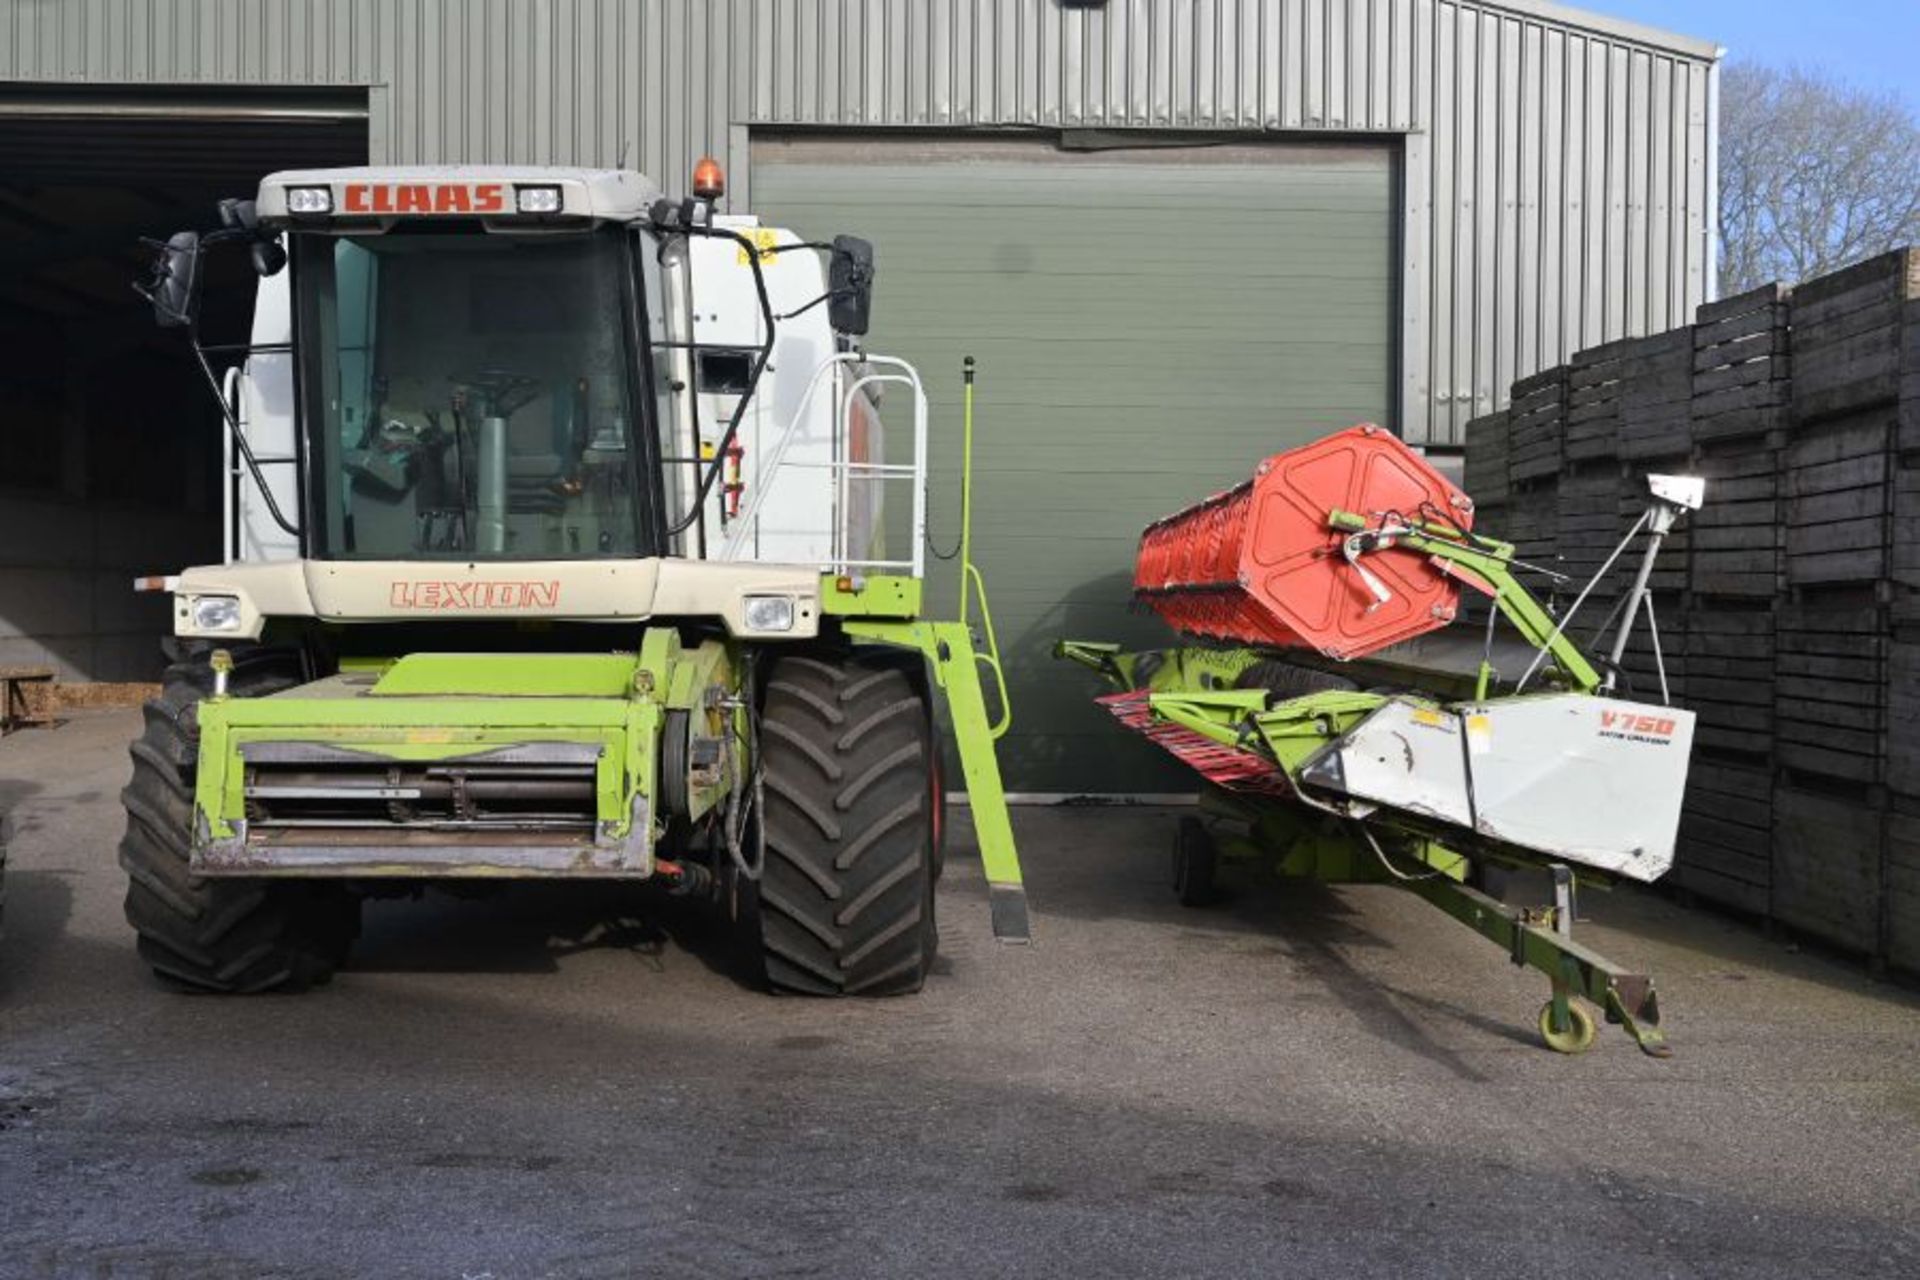 Claas Lexion 480 combine Y383 0DX / 3658 hours with a V750 auto header and header trailer